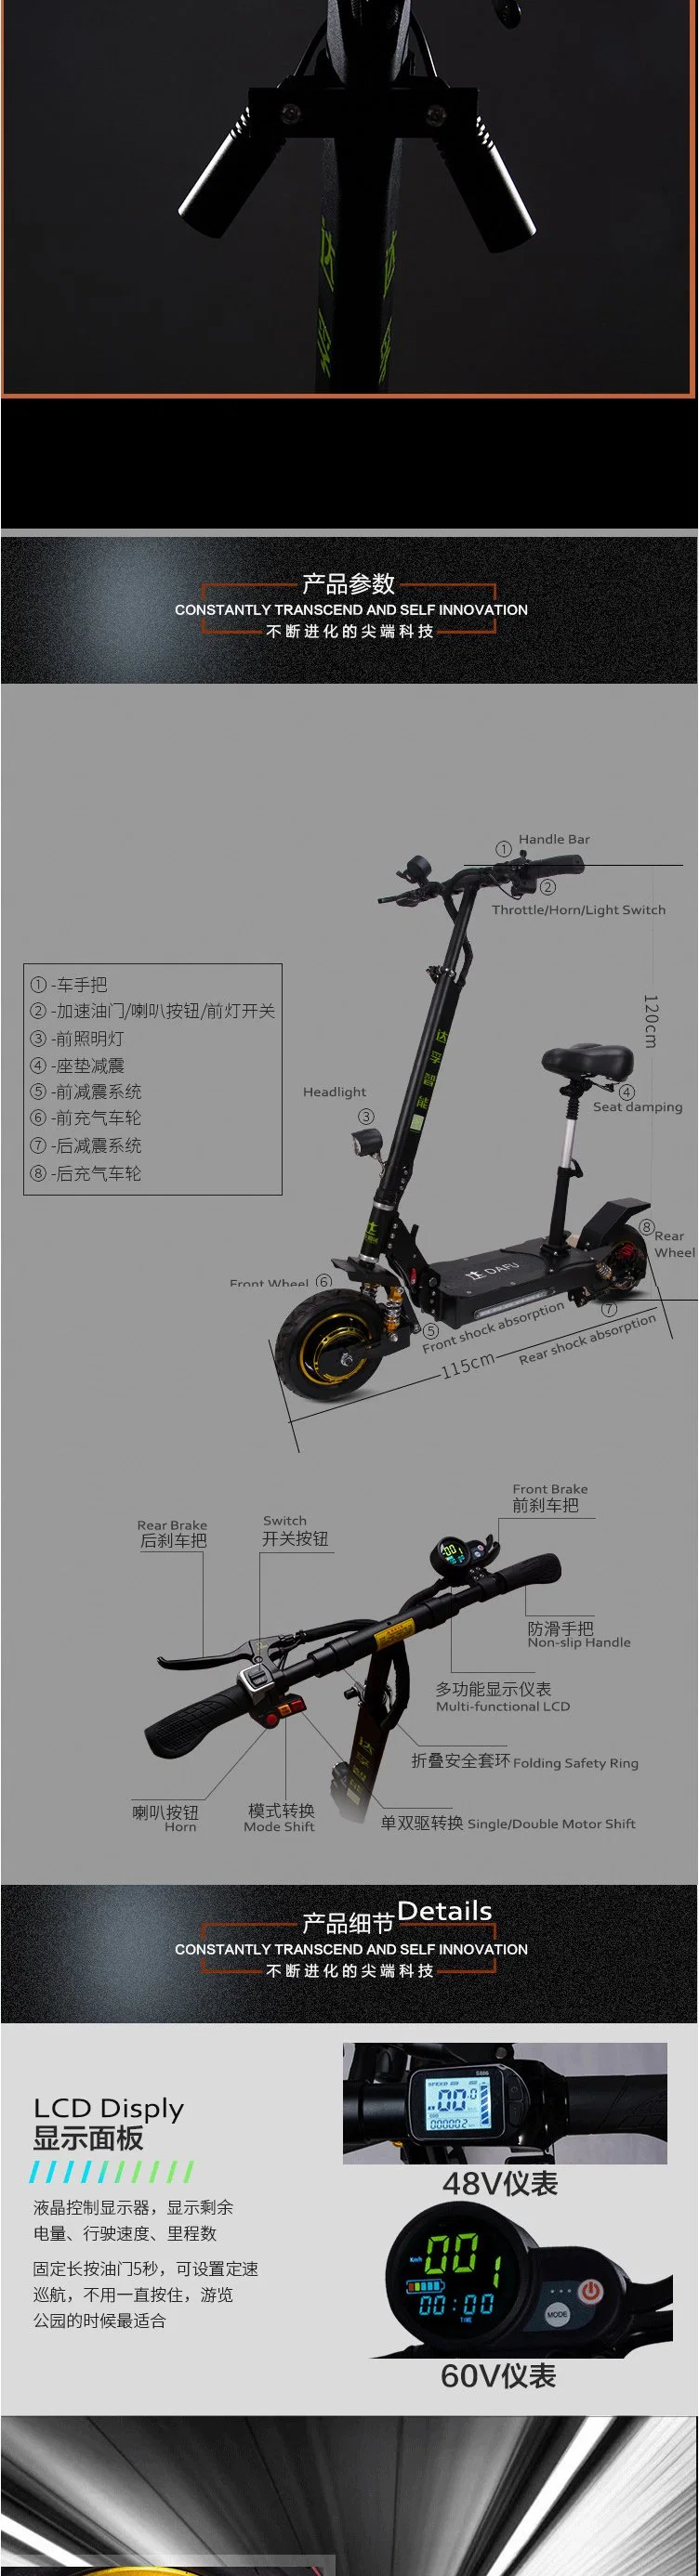 3200W Scoot Electr off Road 48V Motor Weped Electric Scooter 3200W for Adult with Pedal